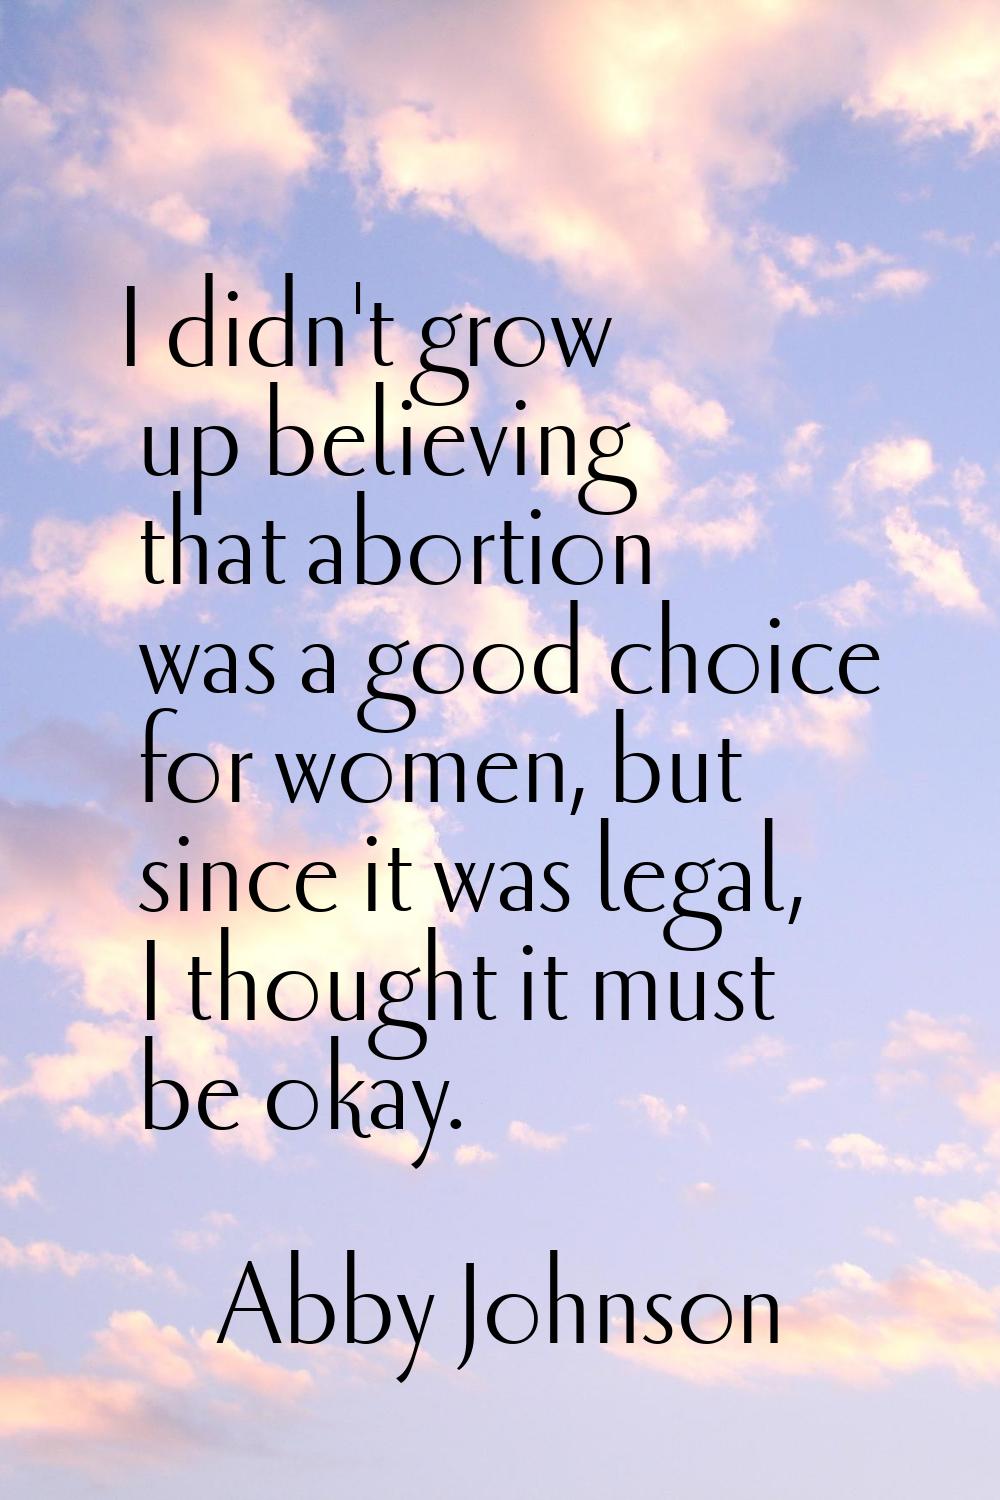 I didn't grow up believing that abortion was a good choice for women, but since it was legal, I tho